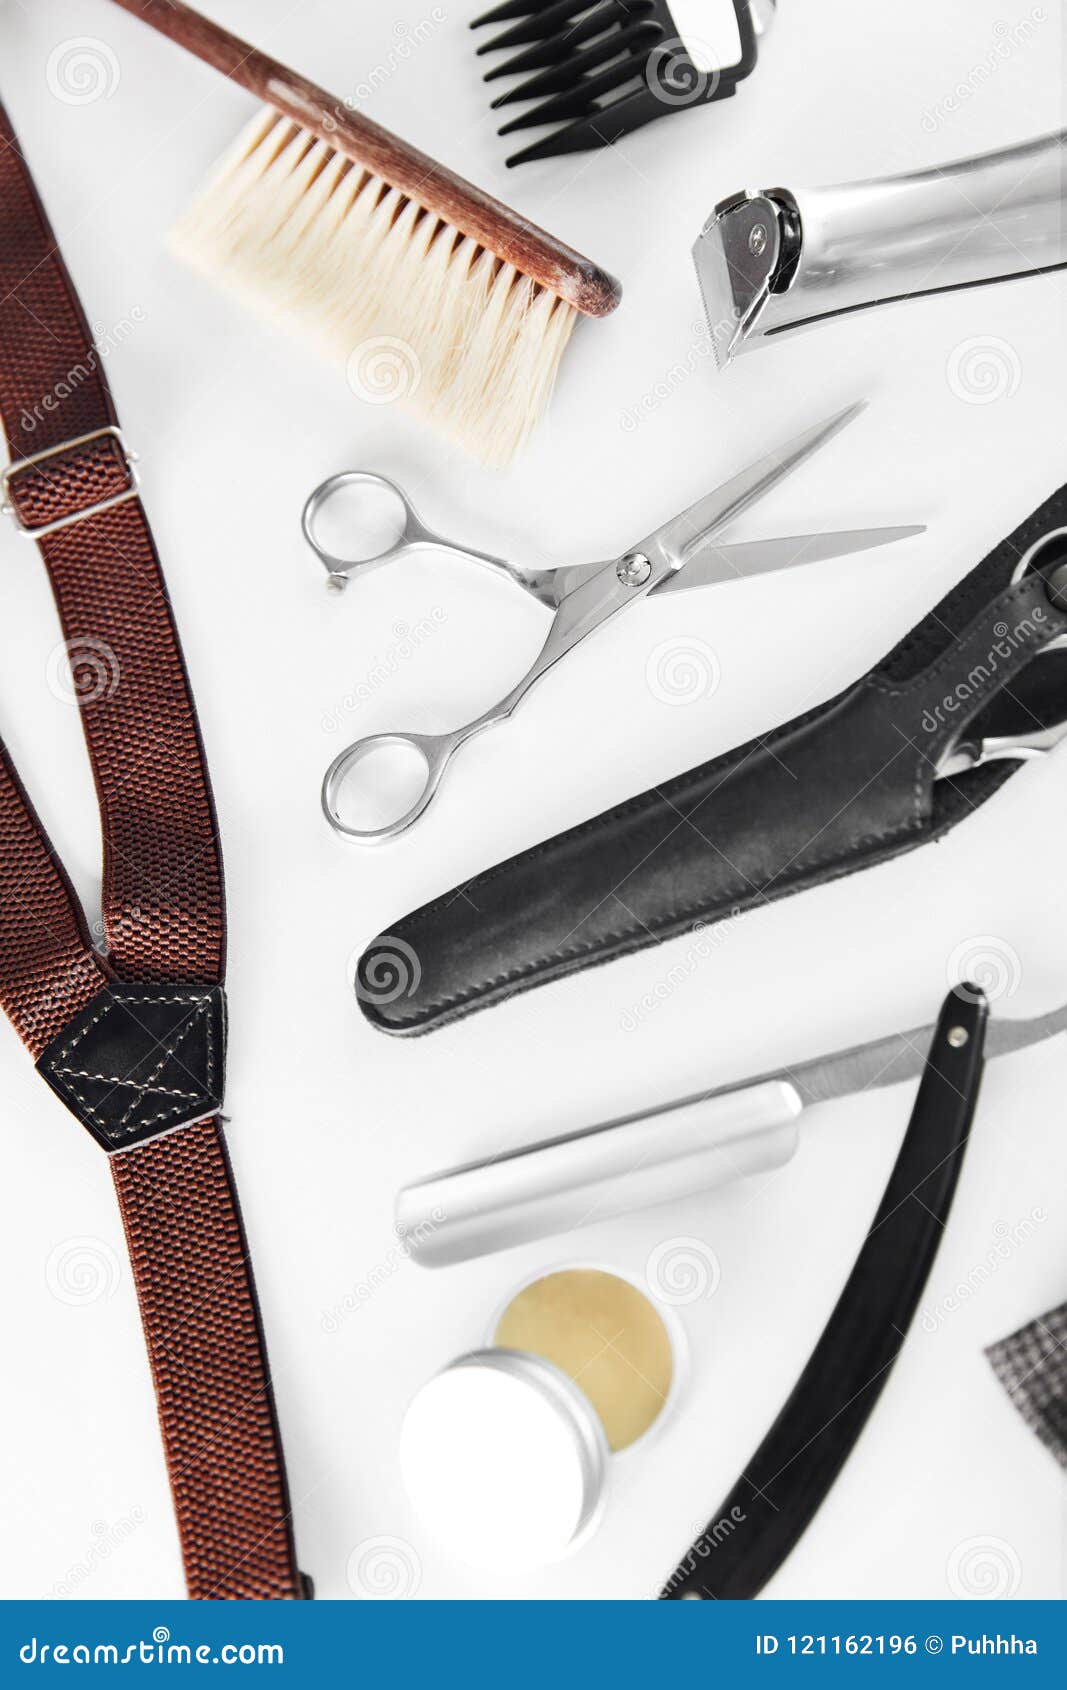 Barbershop Tools Barber Supplies And Equipment Stock Photo